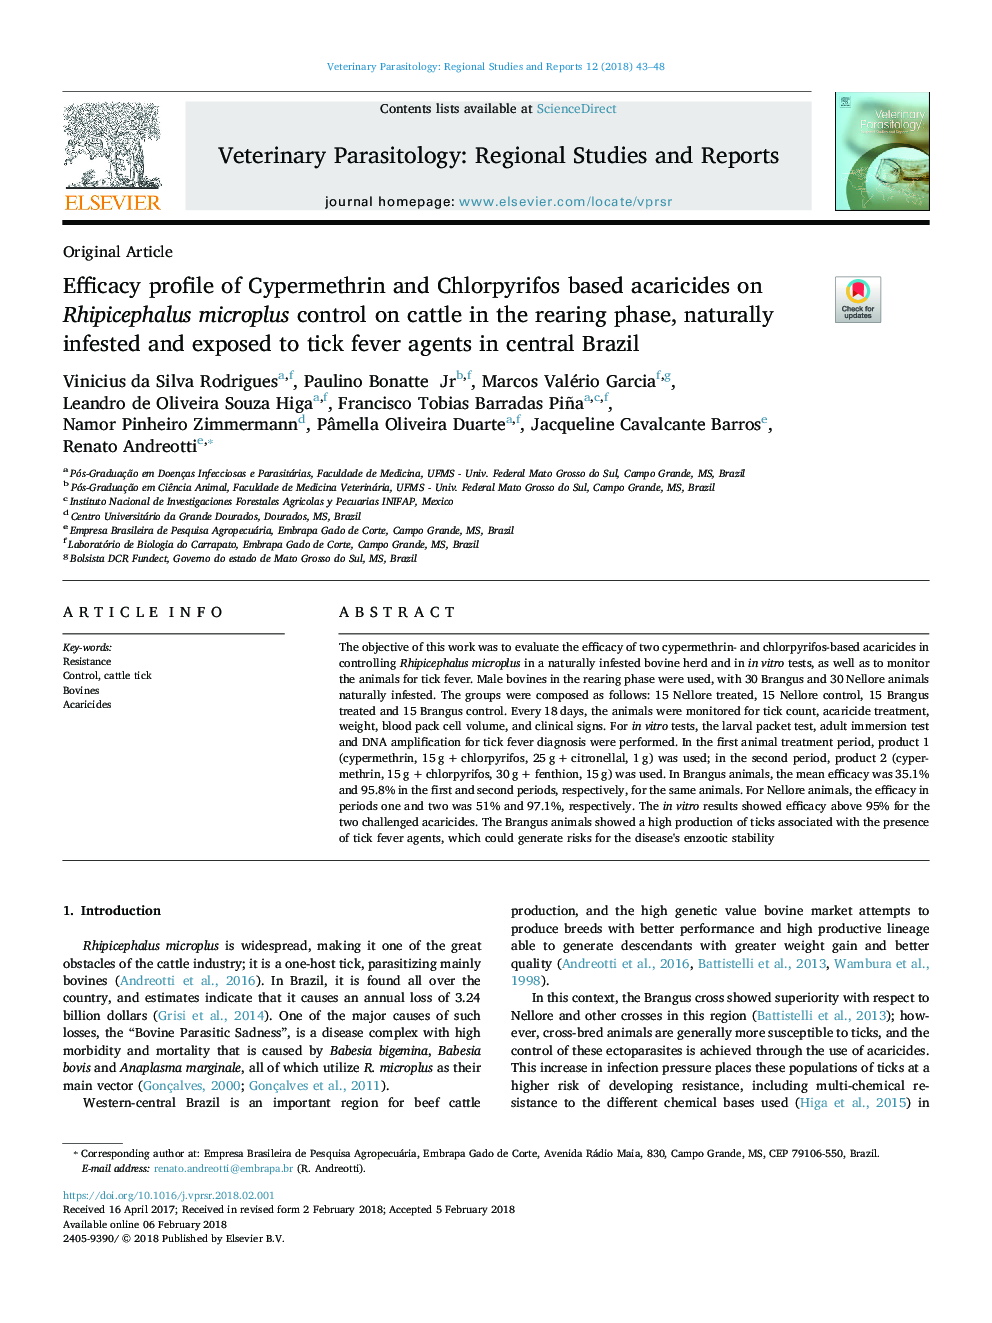 Efficacy profile of Cypermethrin and Chlorpyrifos based acaricides on Rhipicephalus microplus control on cattle in the rearing phase, naturally infested and exposed to tick fever agents in central Brazil